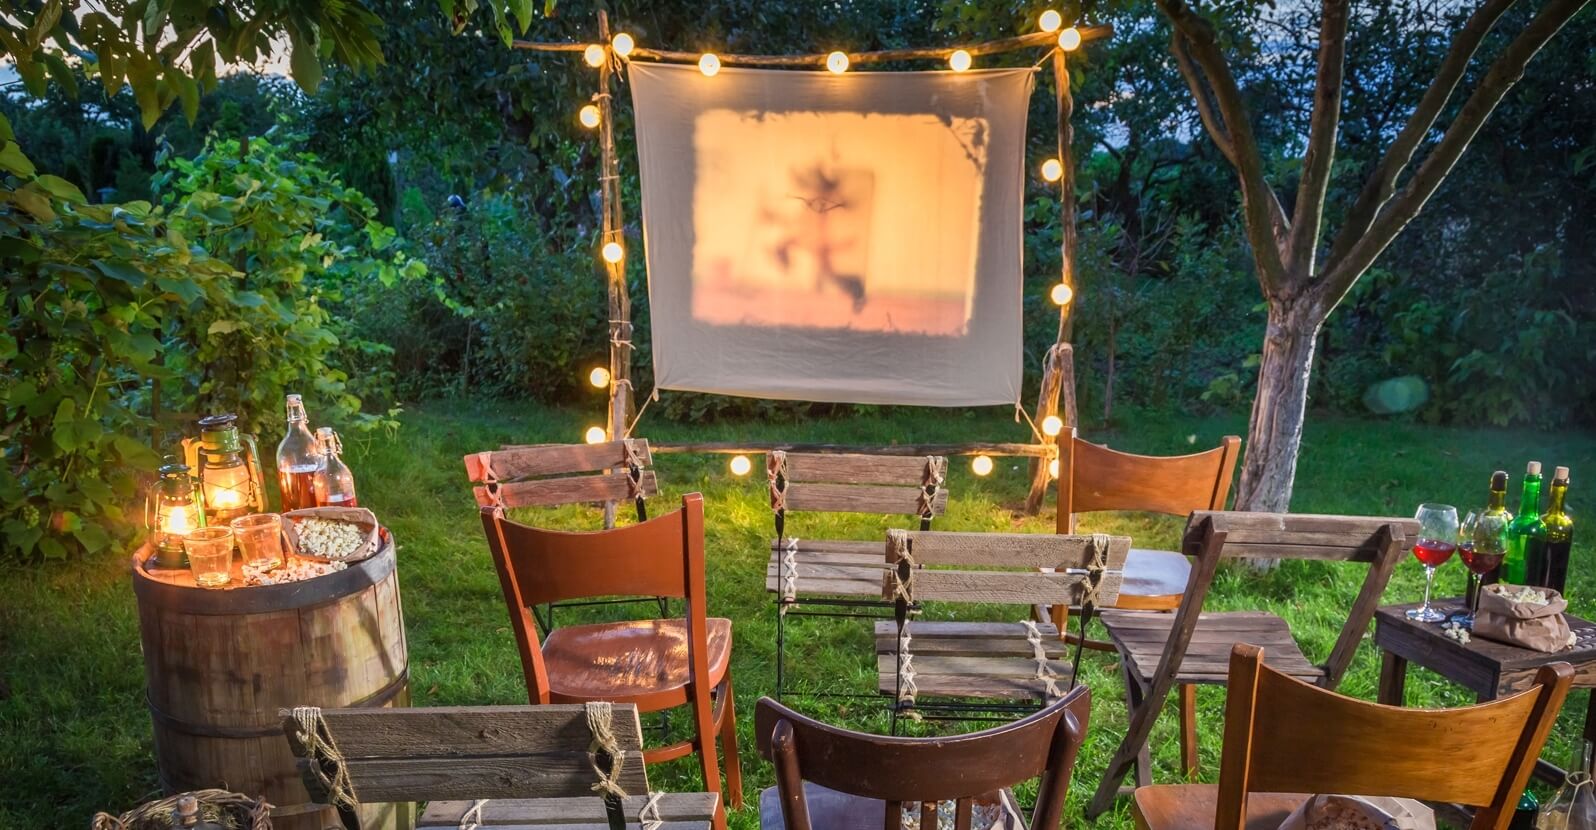 Outdoor Entertainment System